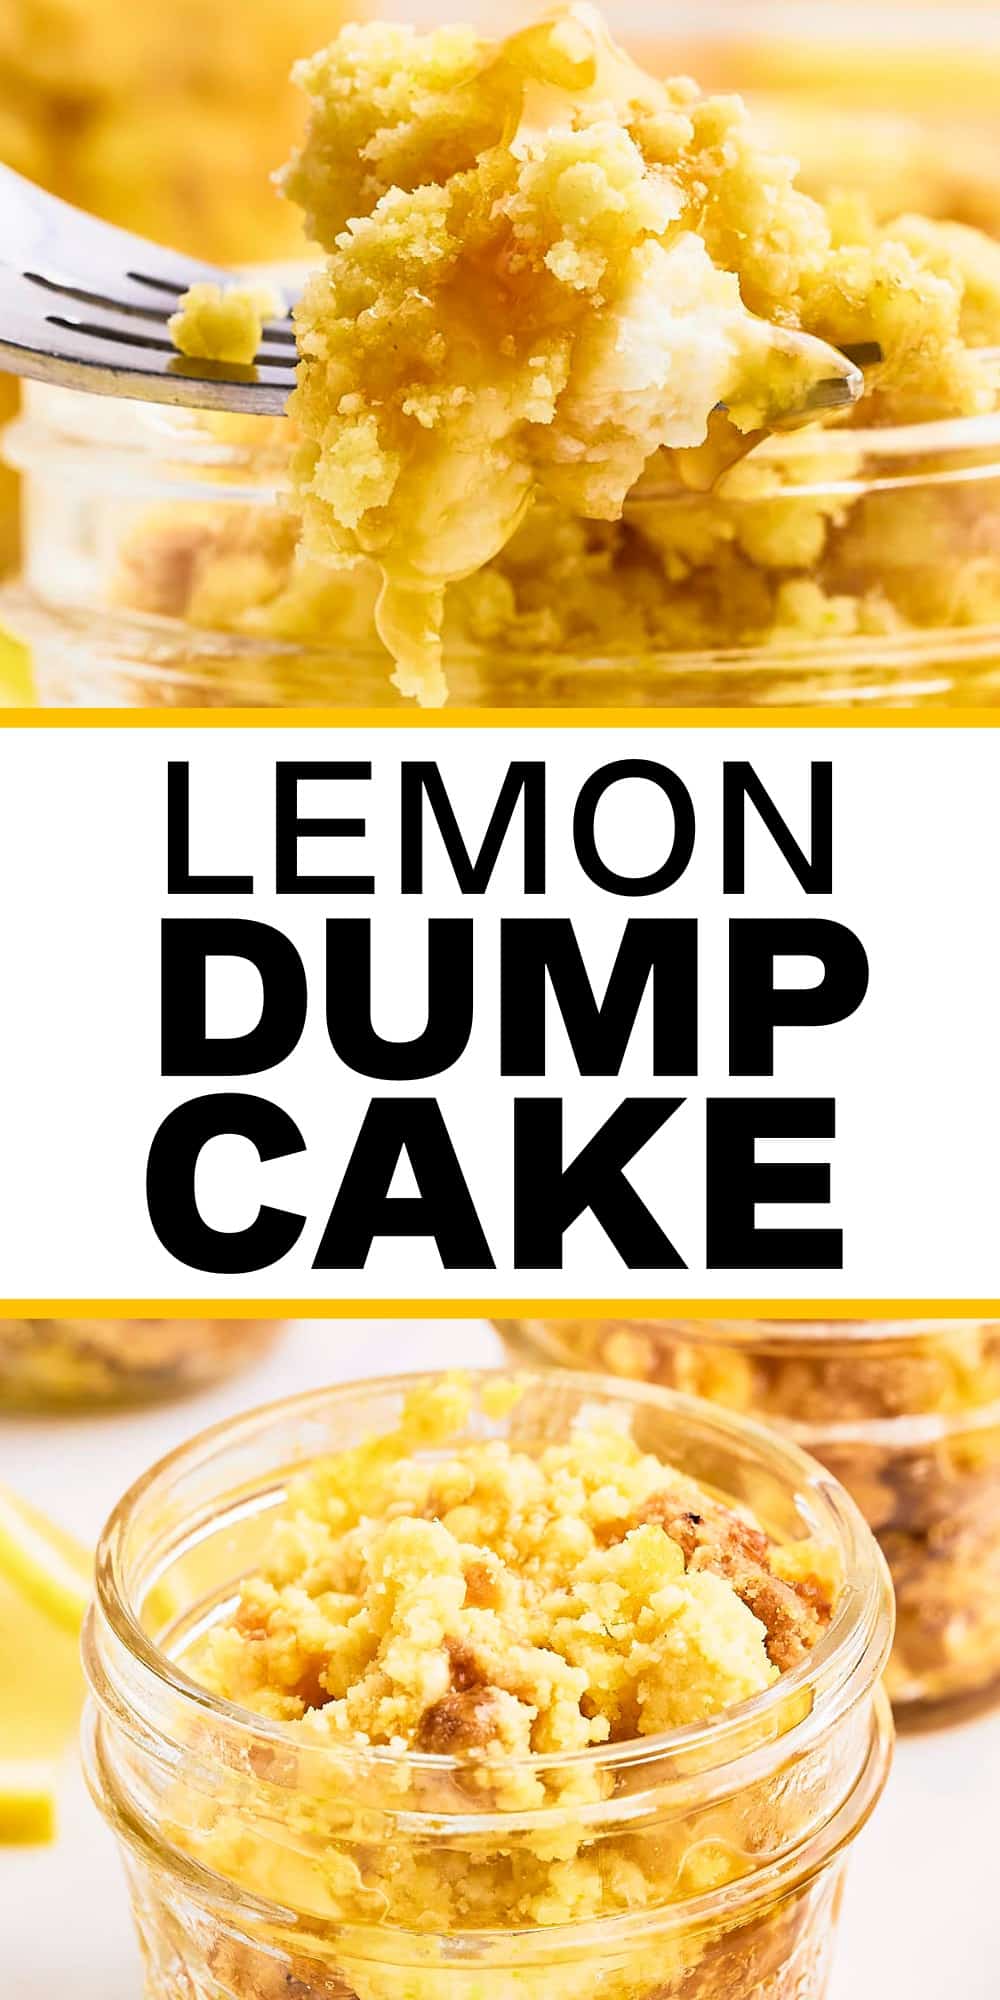 Who said cakes have to be hard to make? This Lemon Dump Cake is a delicious, no-fuss treat! Just dump the ingredients in, bake, and enjoy the citrusy flavor of summer any time of year! 🍋 🍋 #cheerfulcook #lemondaydumpcake #lemoncurd #dumpcake  via @cheerfulcook